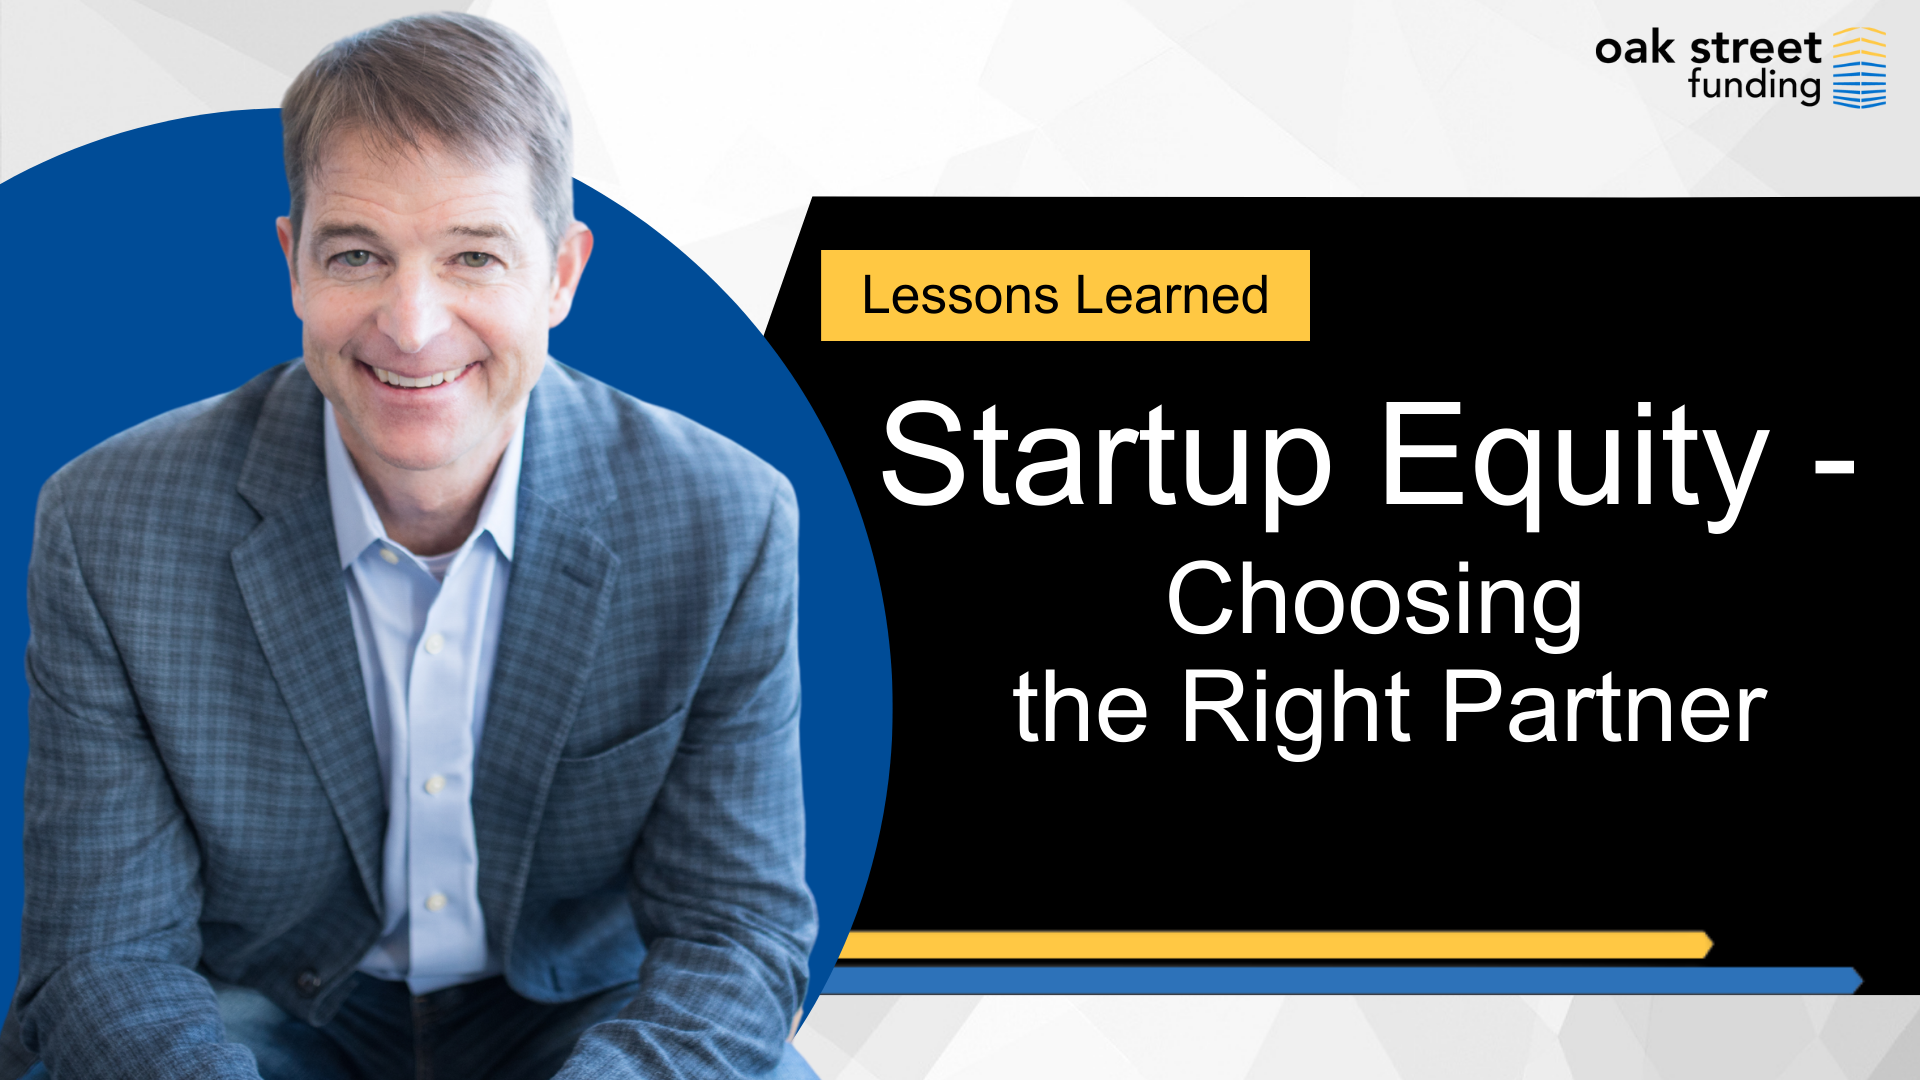 Lessons Learned: Startup Equity - Choosing the Right Partner